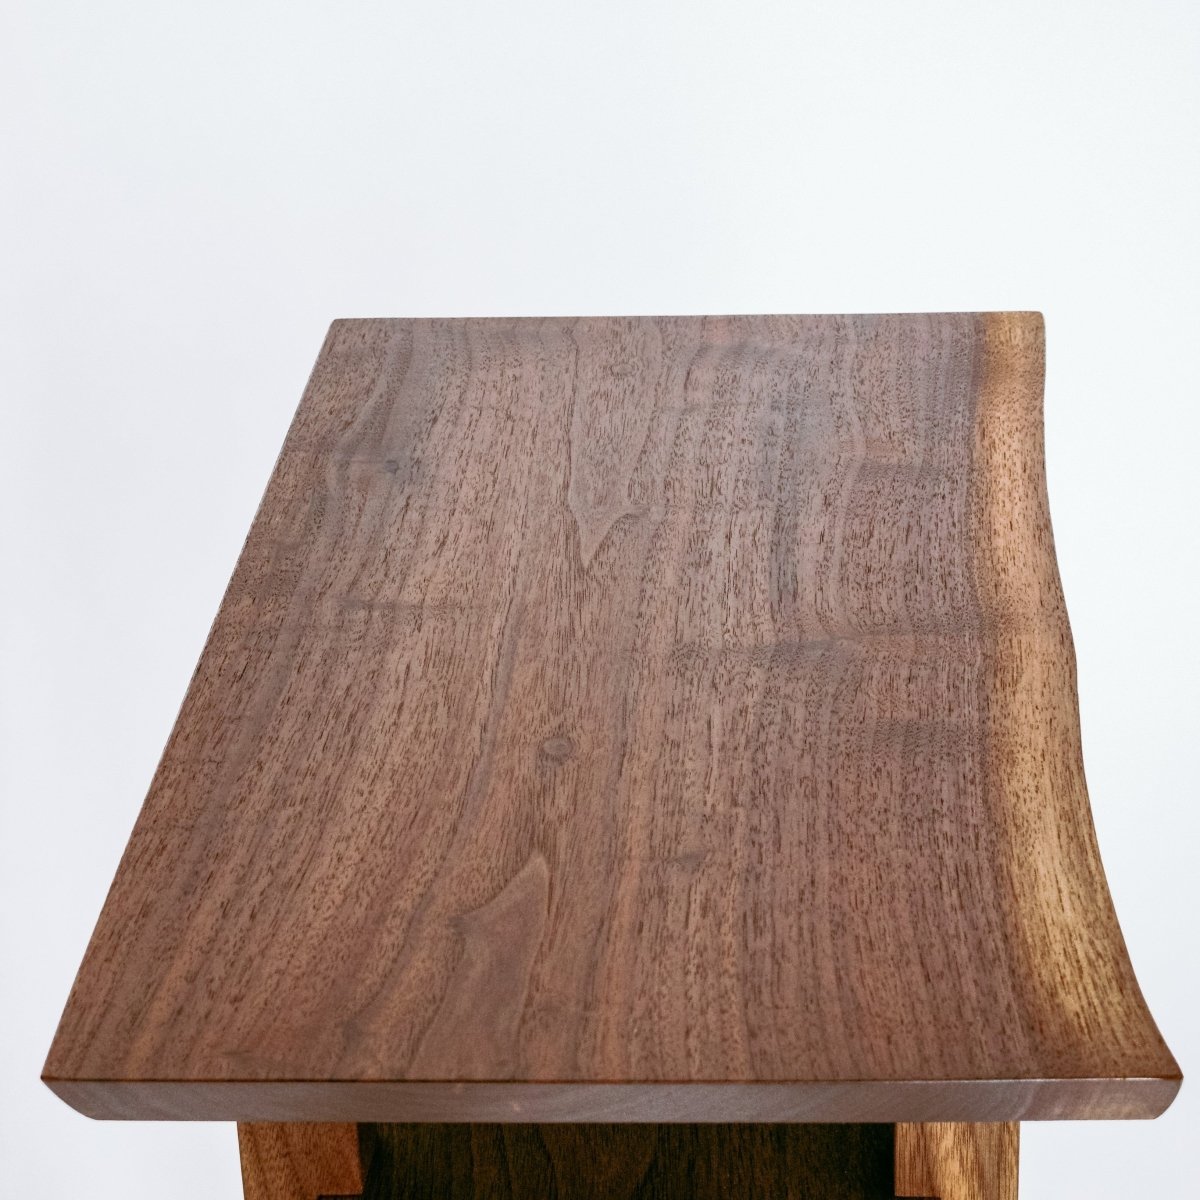 A live edge walnut table top adds an extra touch of Mother Nature's beauty to your intentional home decor.  This small end table has a live edge walnut table top- by Mokuzai Furniture